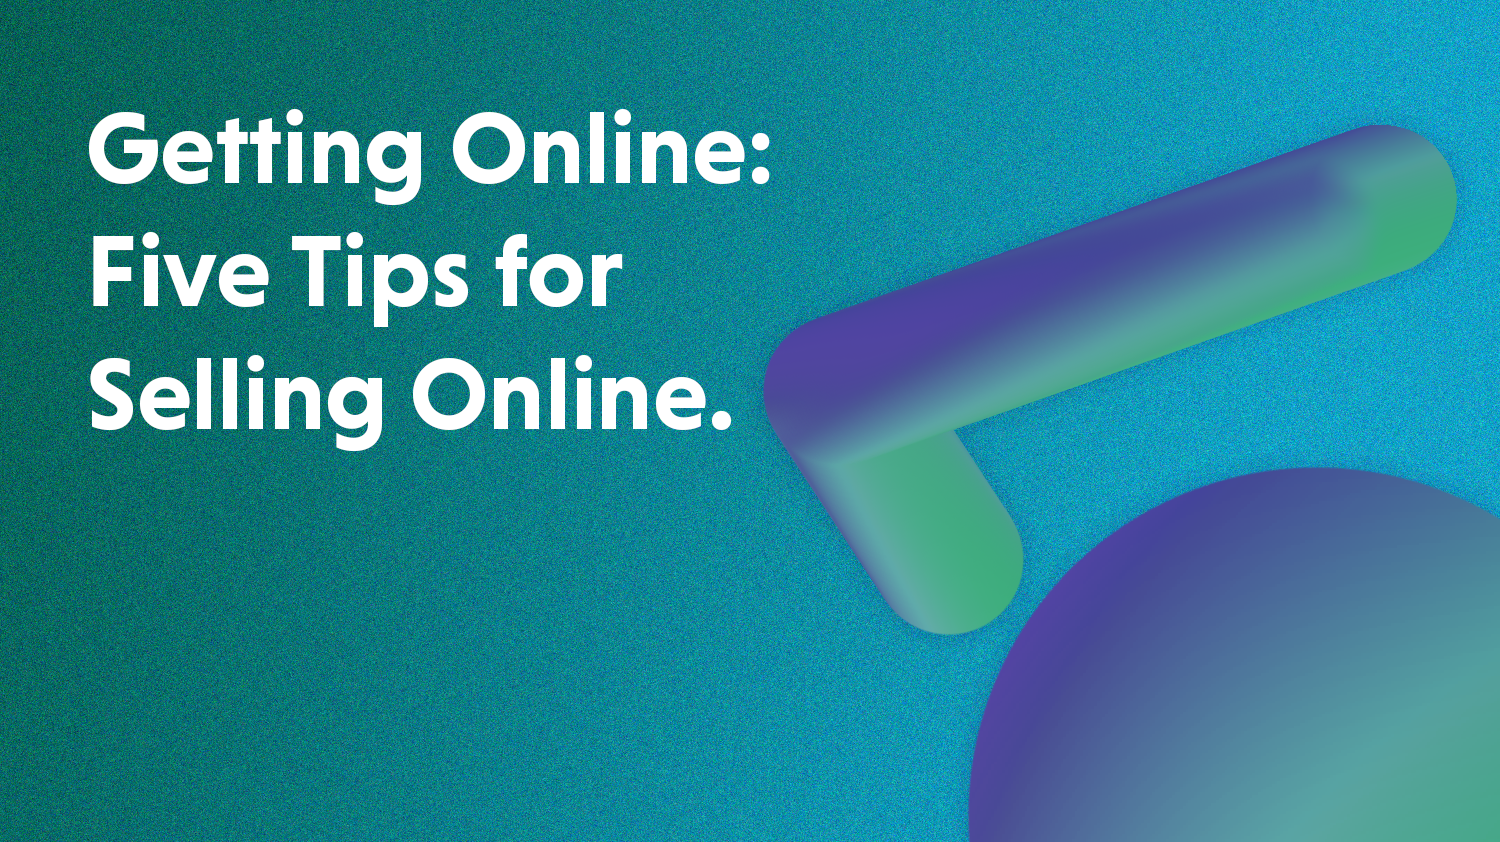 Getting Online: 5 Tips For Selling Online